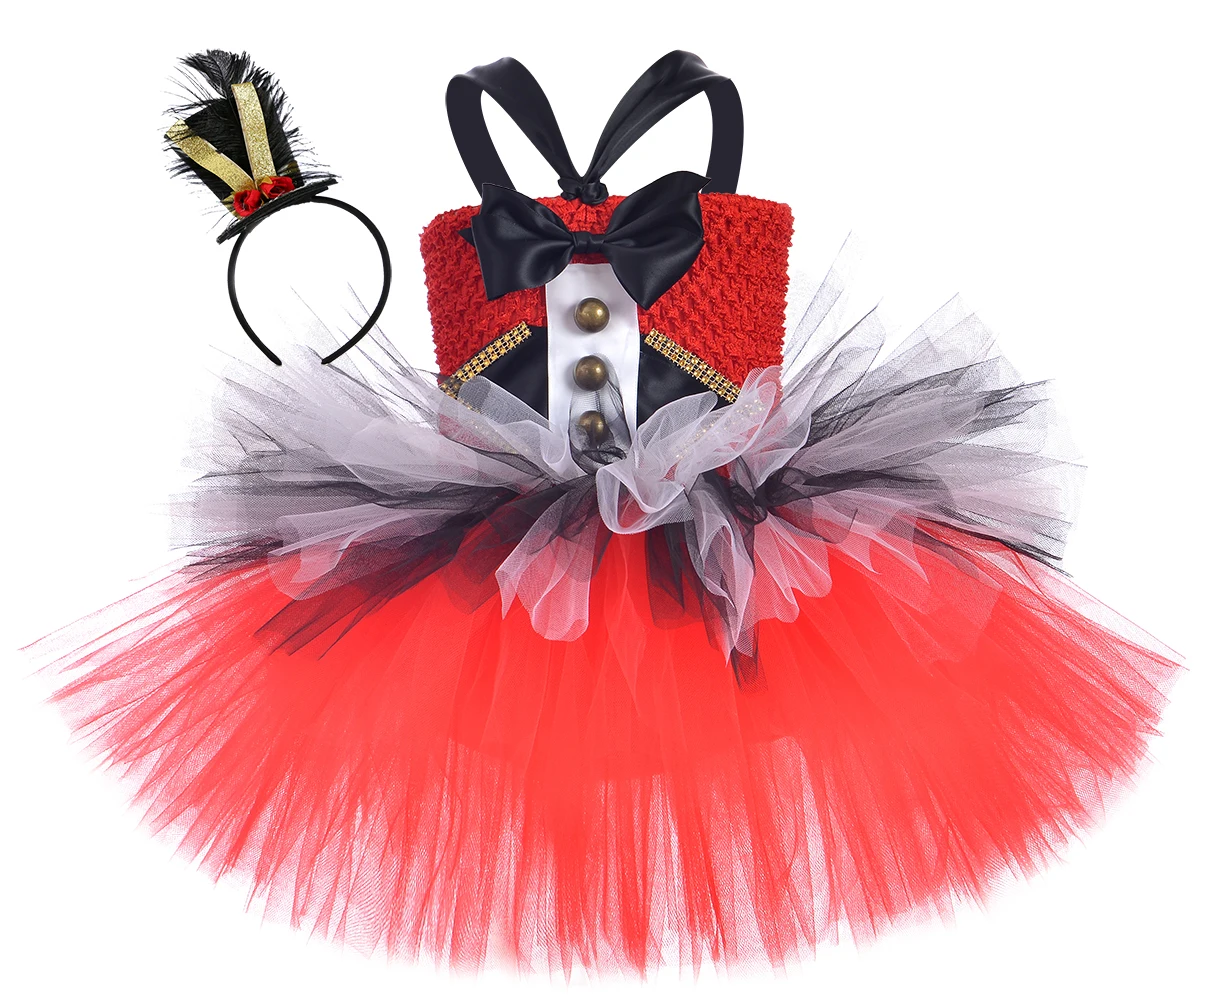 

Cute Handmade Kids Costume Clothes Rock Puffy Circus Cosplay Party Halloween Tutu Girl Dress, Red